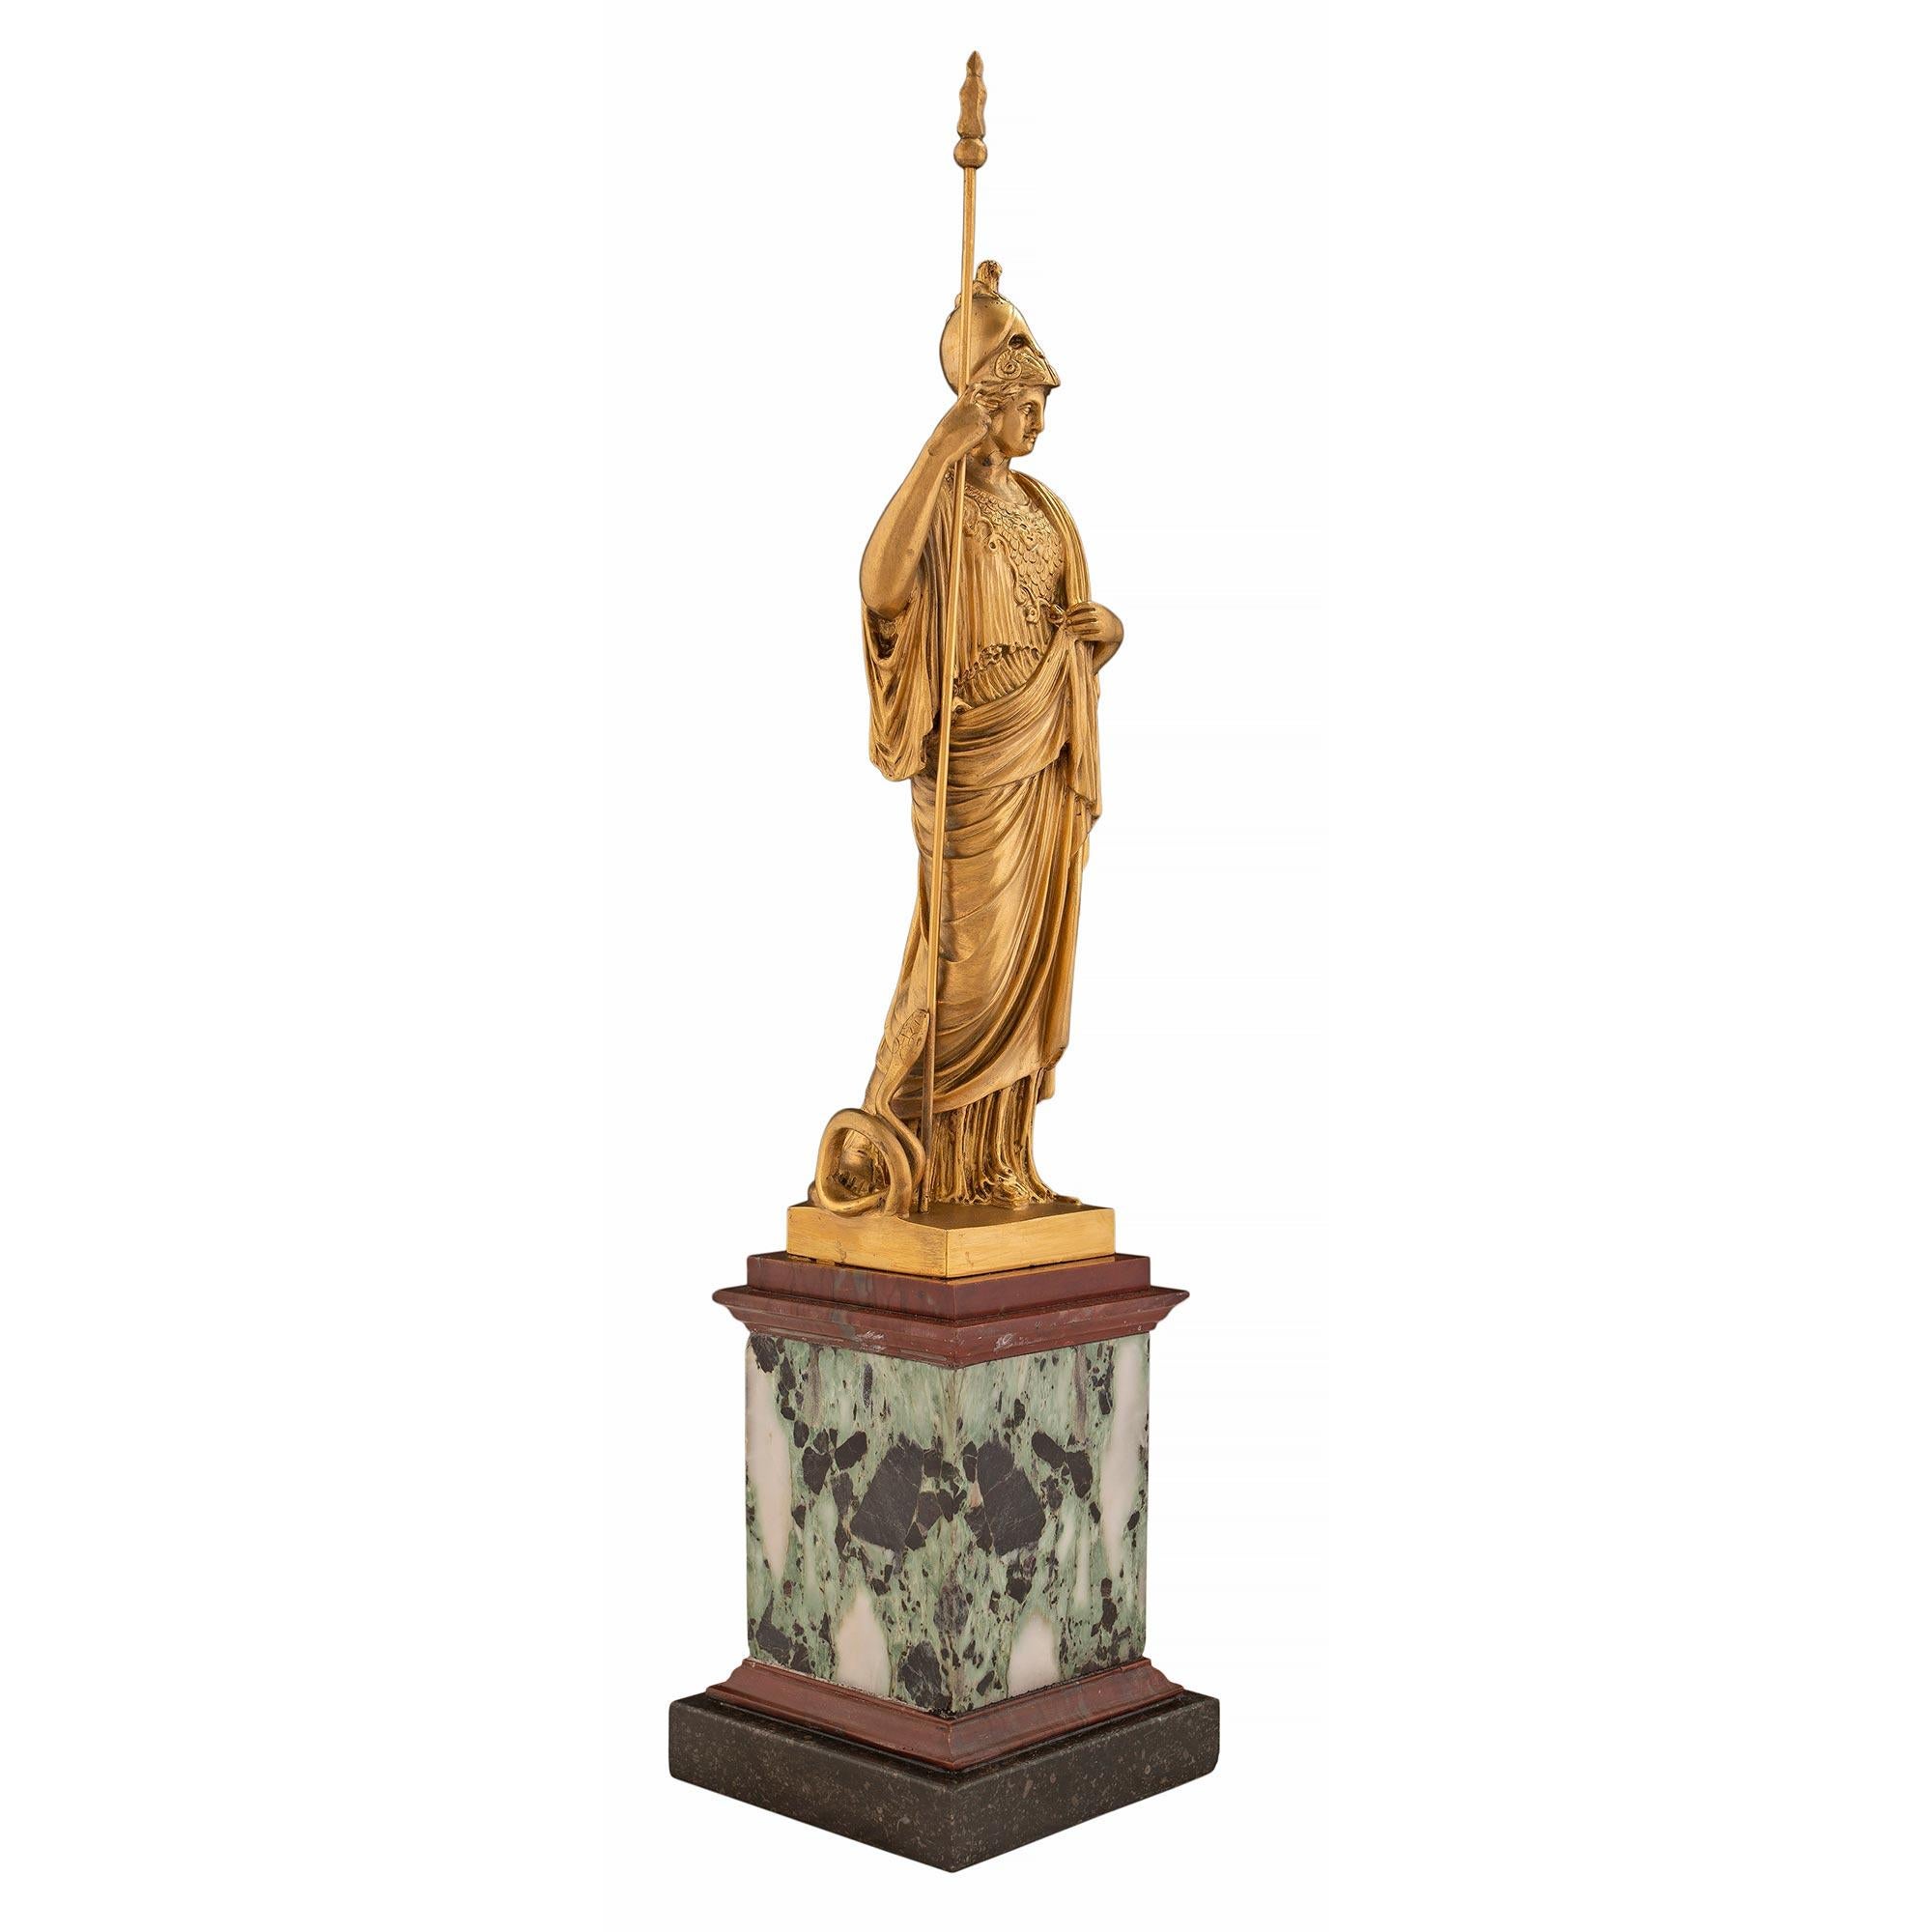 A most decorative and high quality Continental 19th century neo-classical st. ormolu and marble statue of Athena. The statue is raised by a plinth with a bottom Occhio di Pavone marble base below the Verde Antico marble column which is flanked by